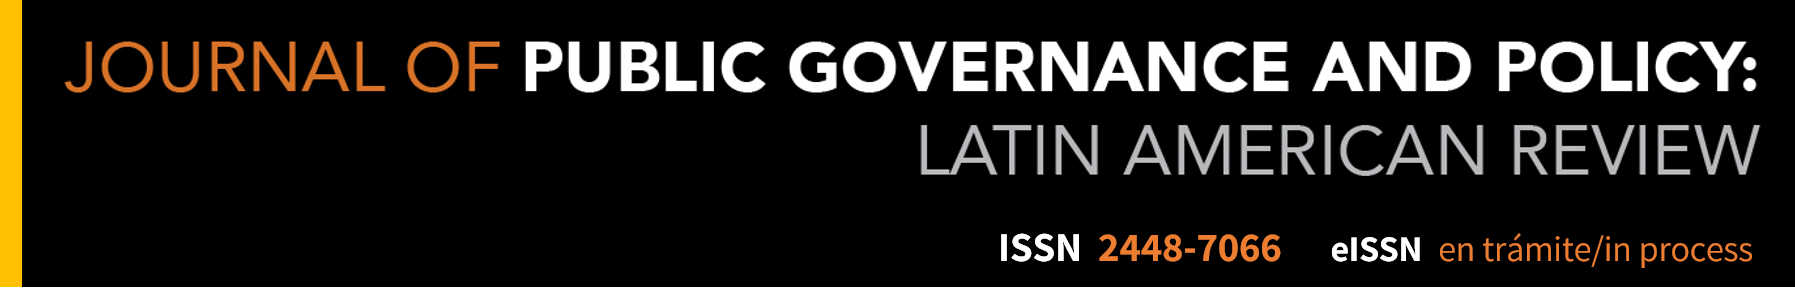 Journal of Public Governance and Policy